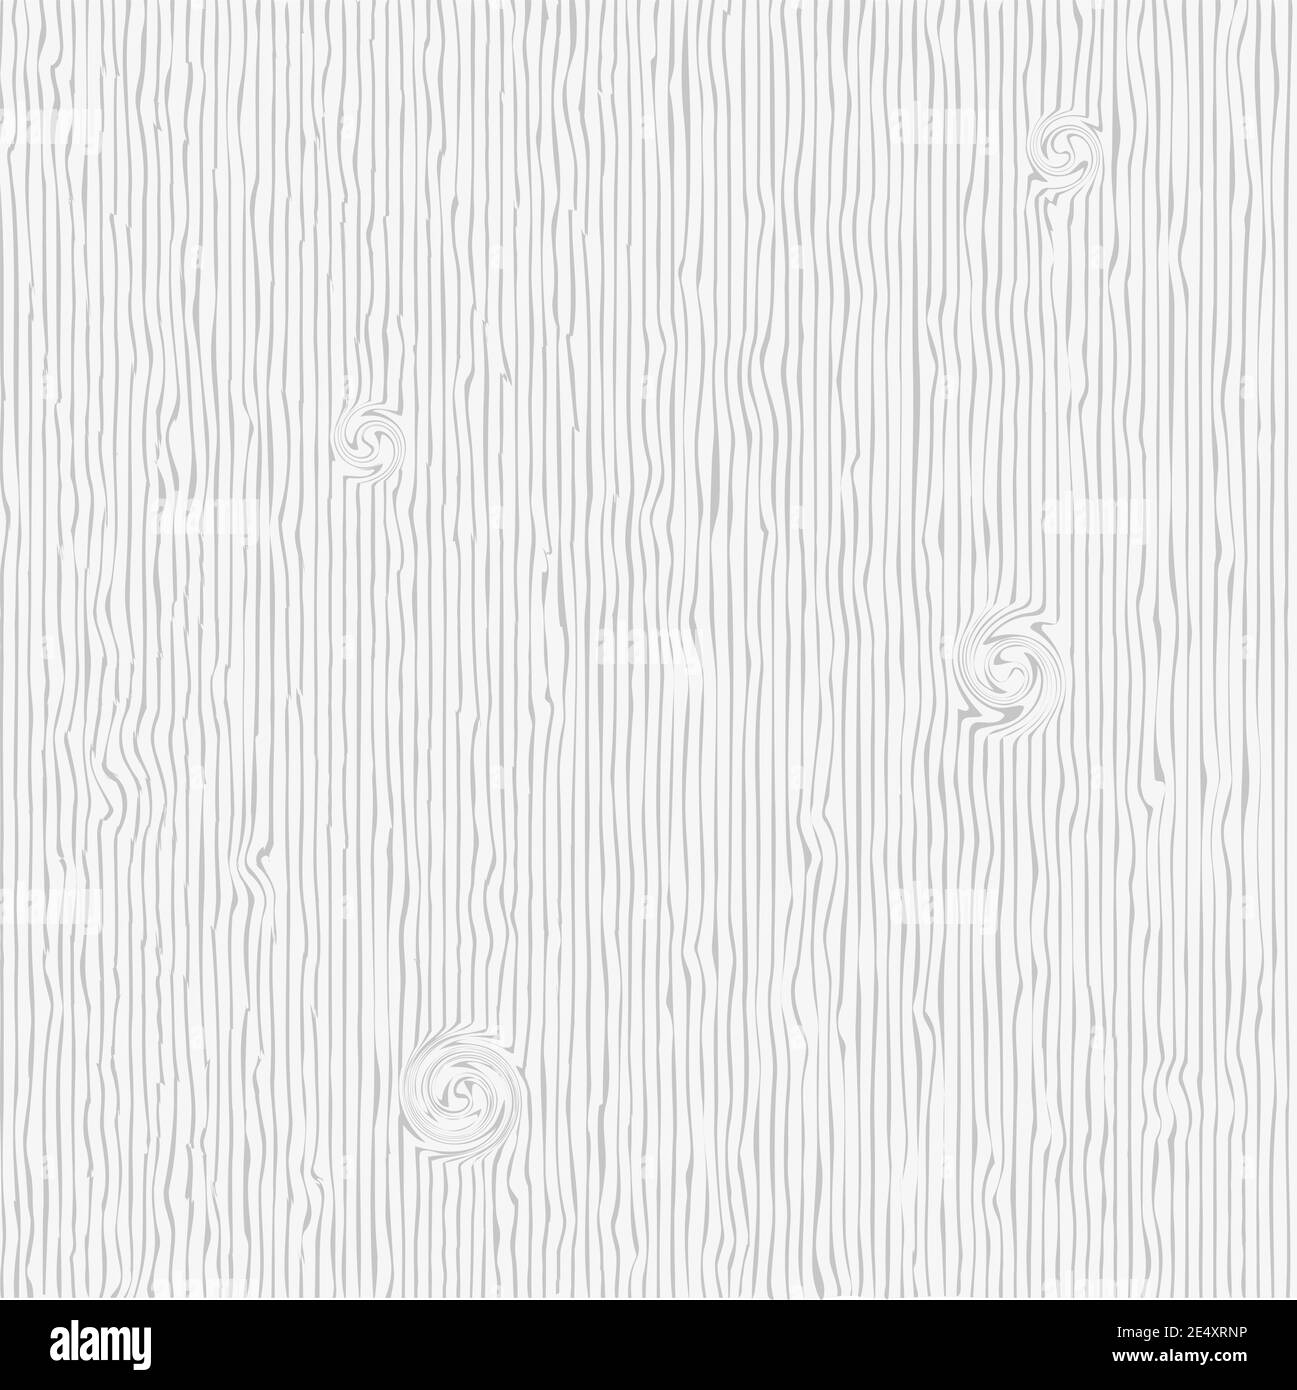 Wood Texture Wood Background Vector Stock Vector Image And Art Alamy